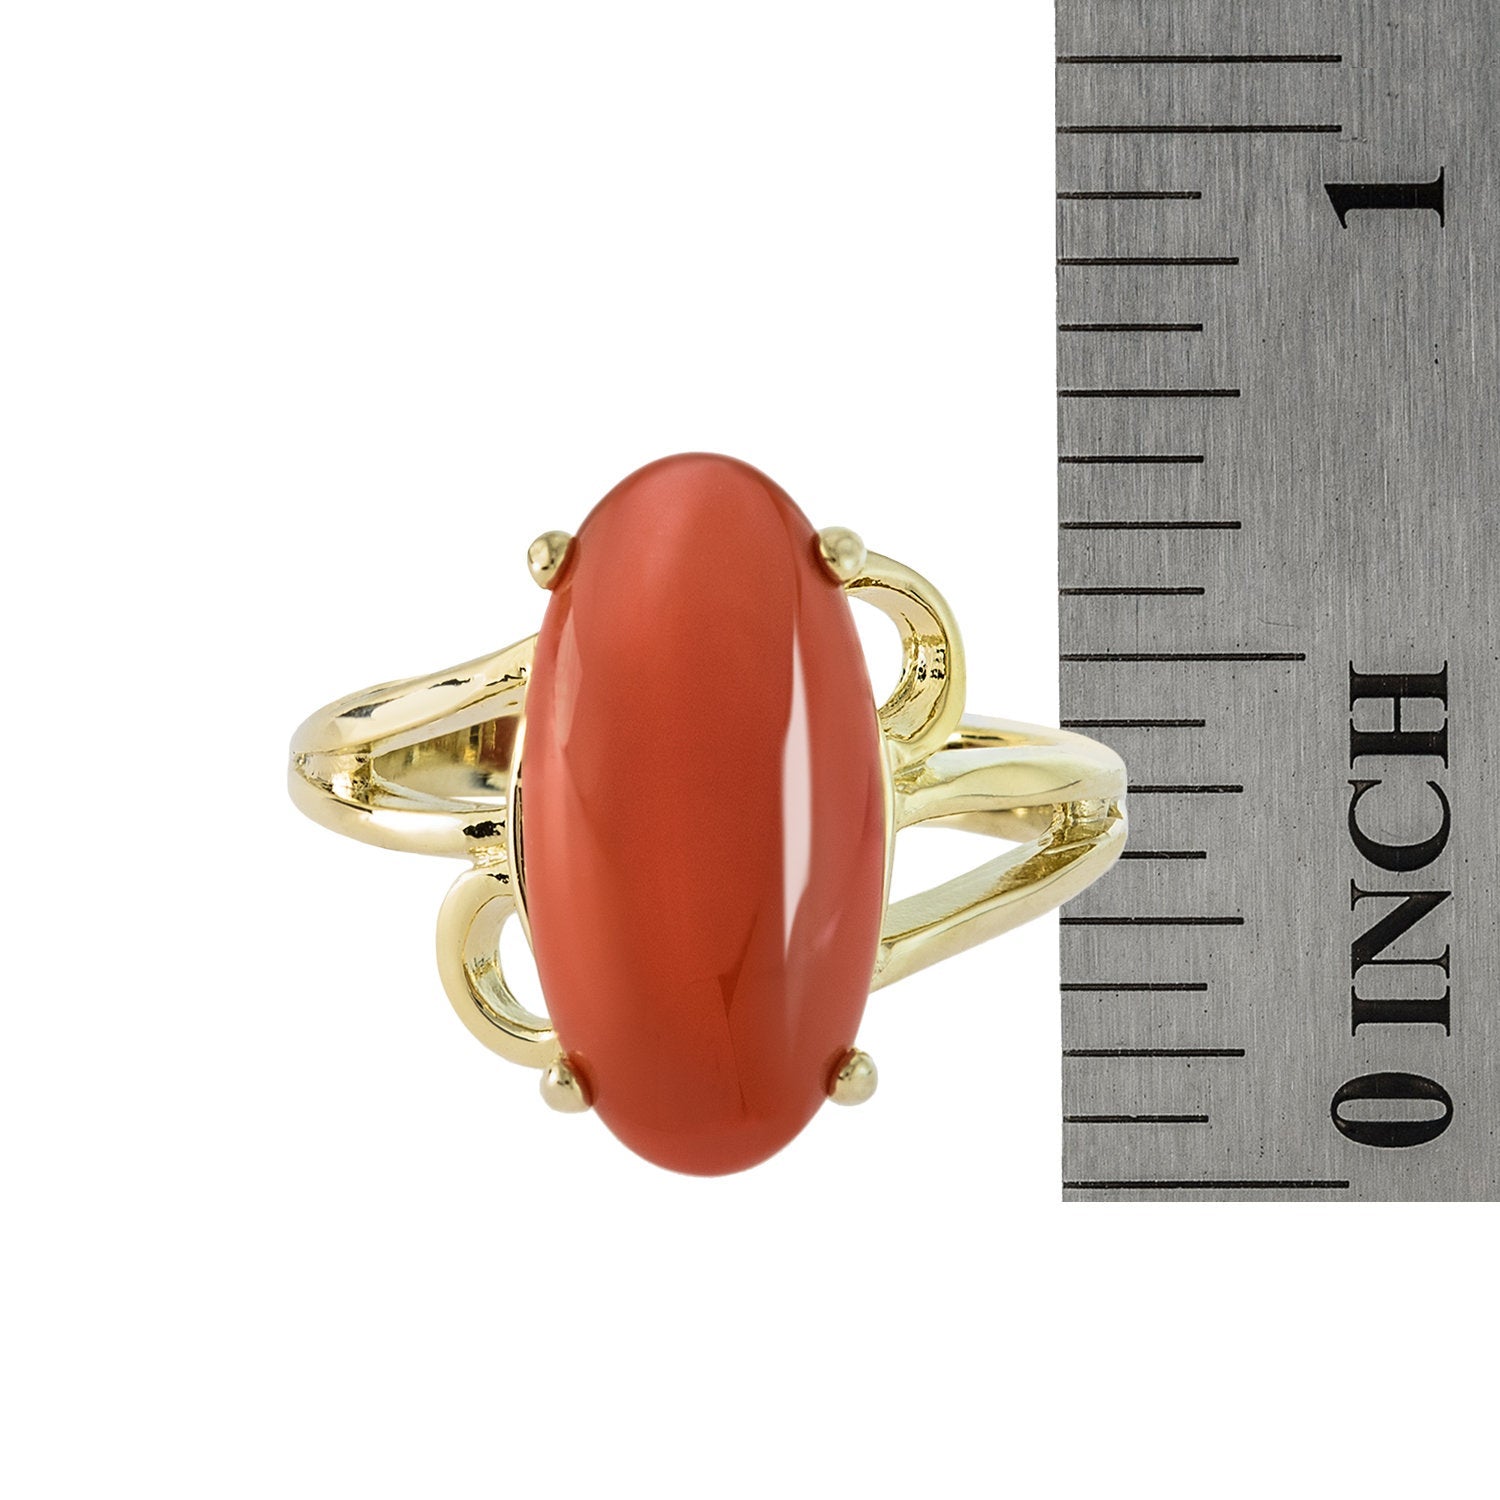 vintage-imitation-coral-gold-plated-cocktail-ring